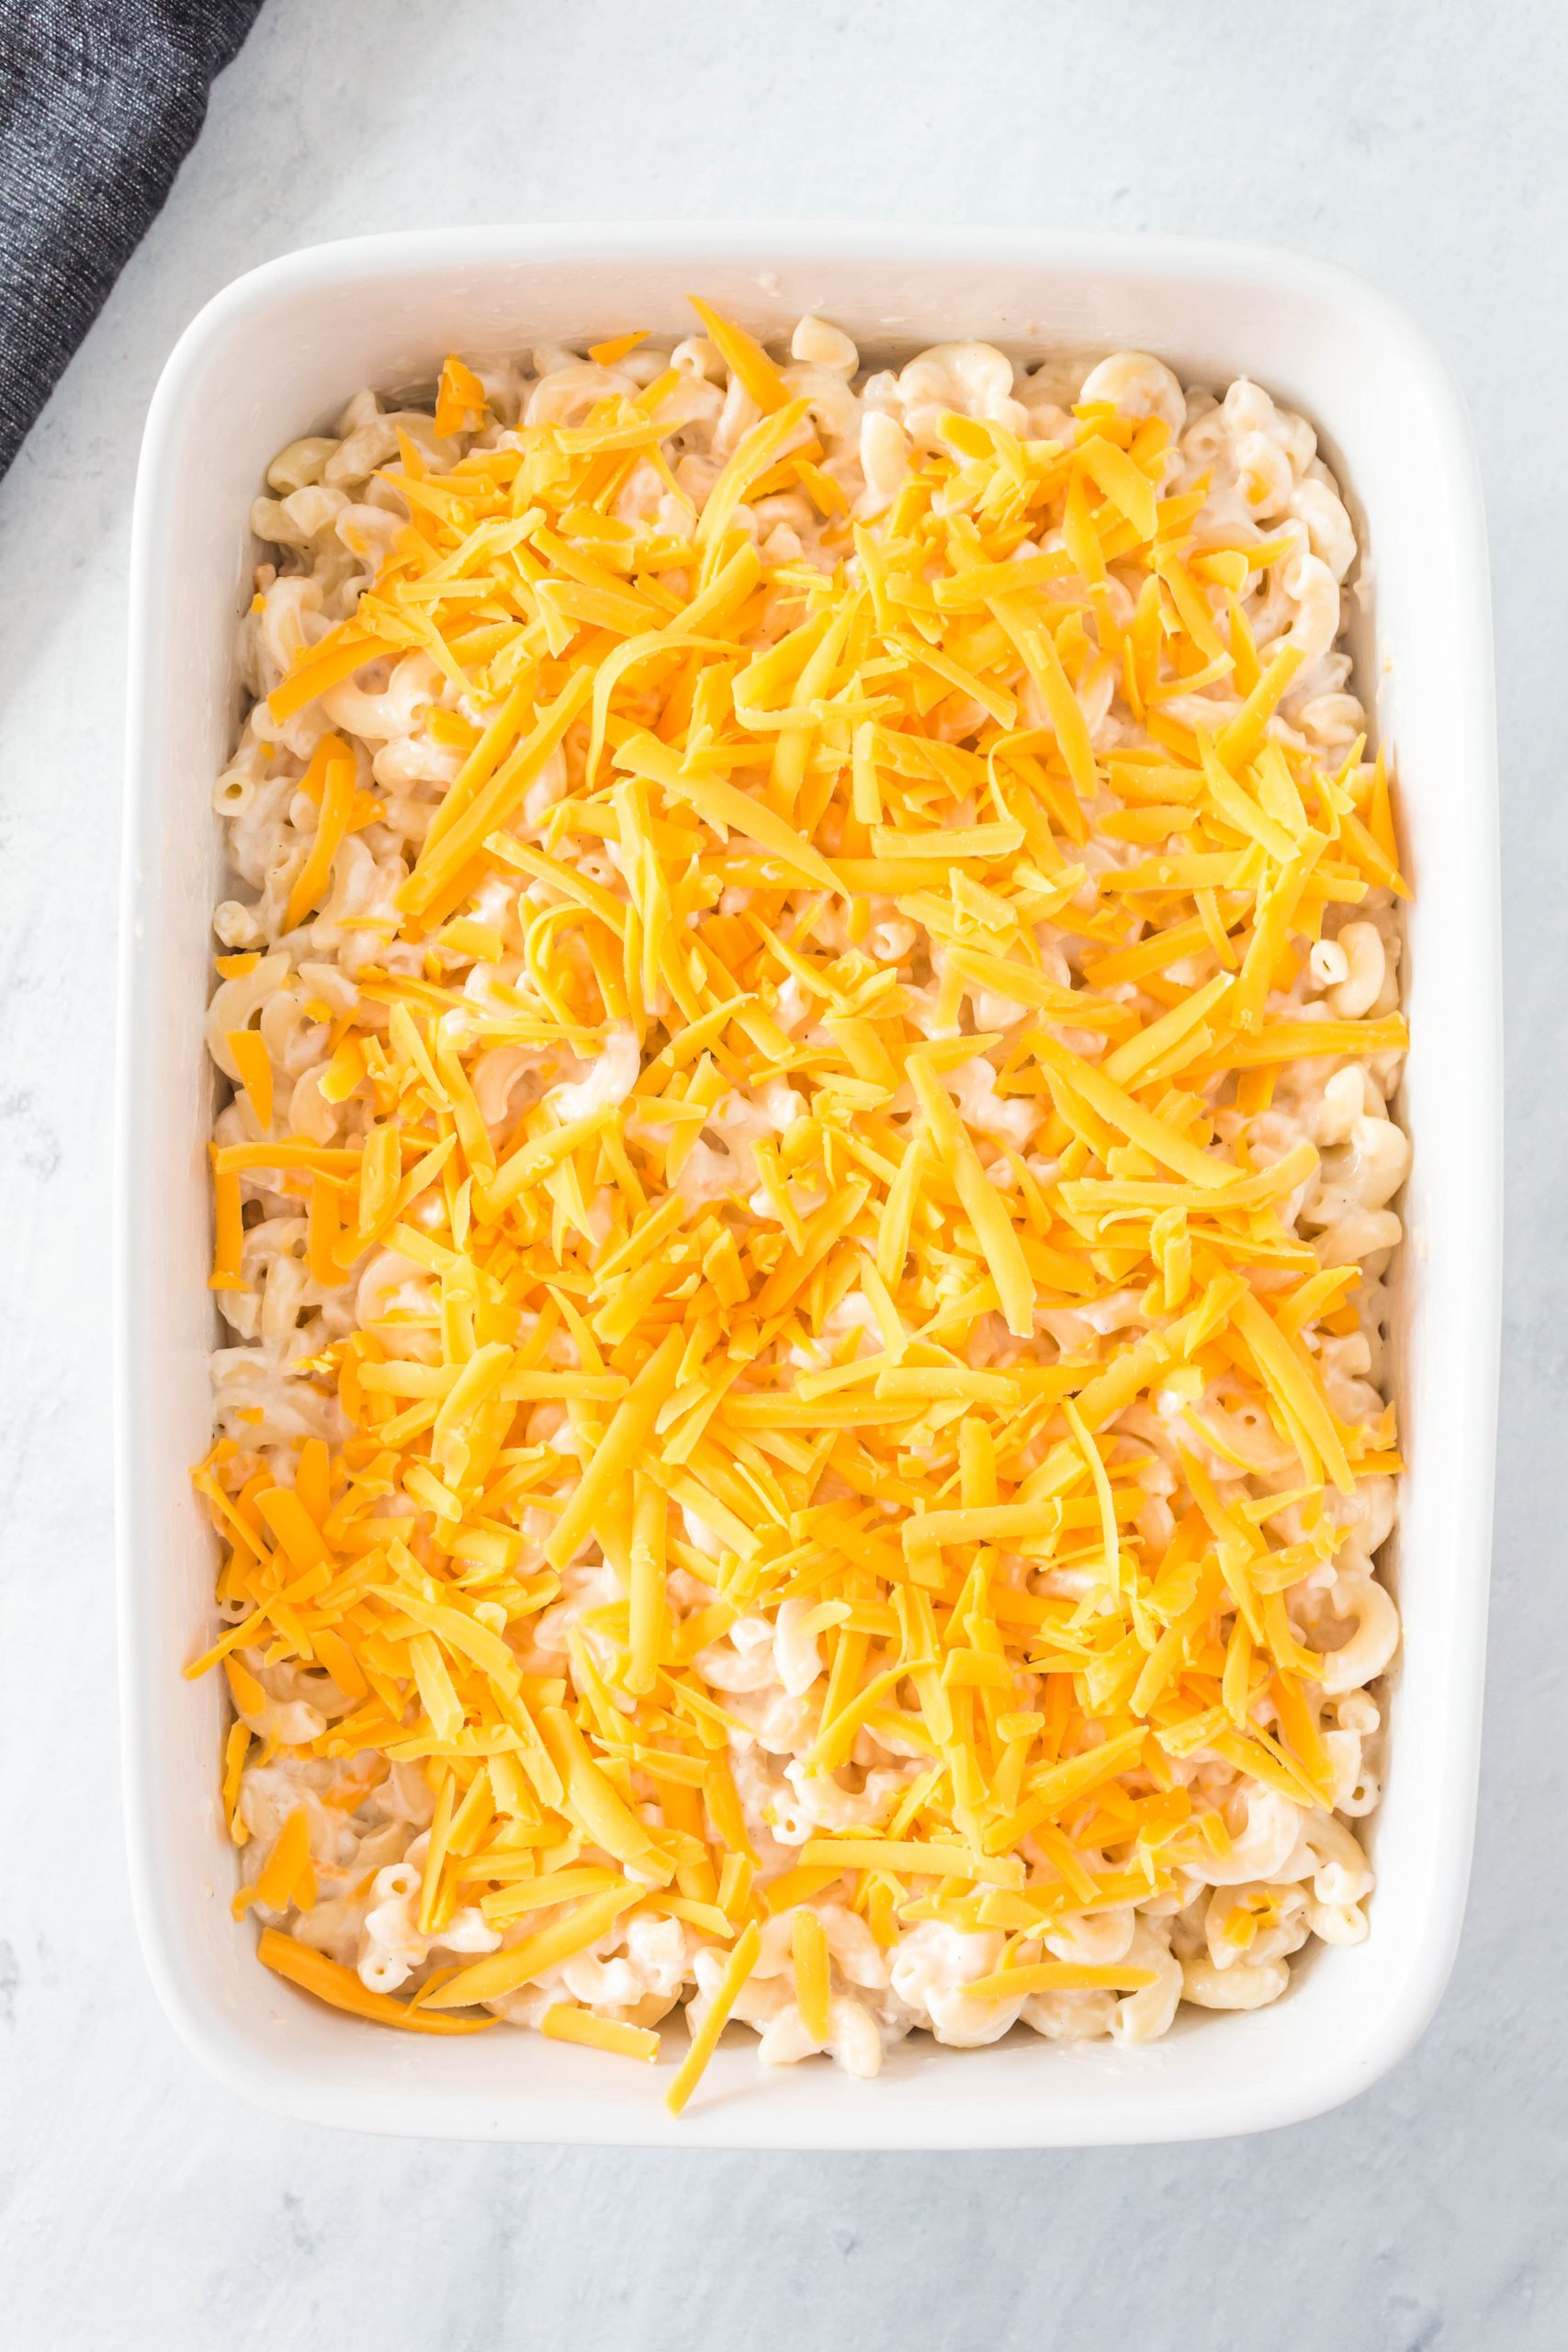 A white dish of unbaked casserole with shredded cheese on top.